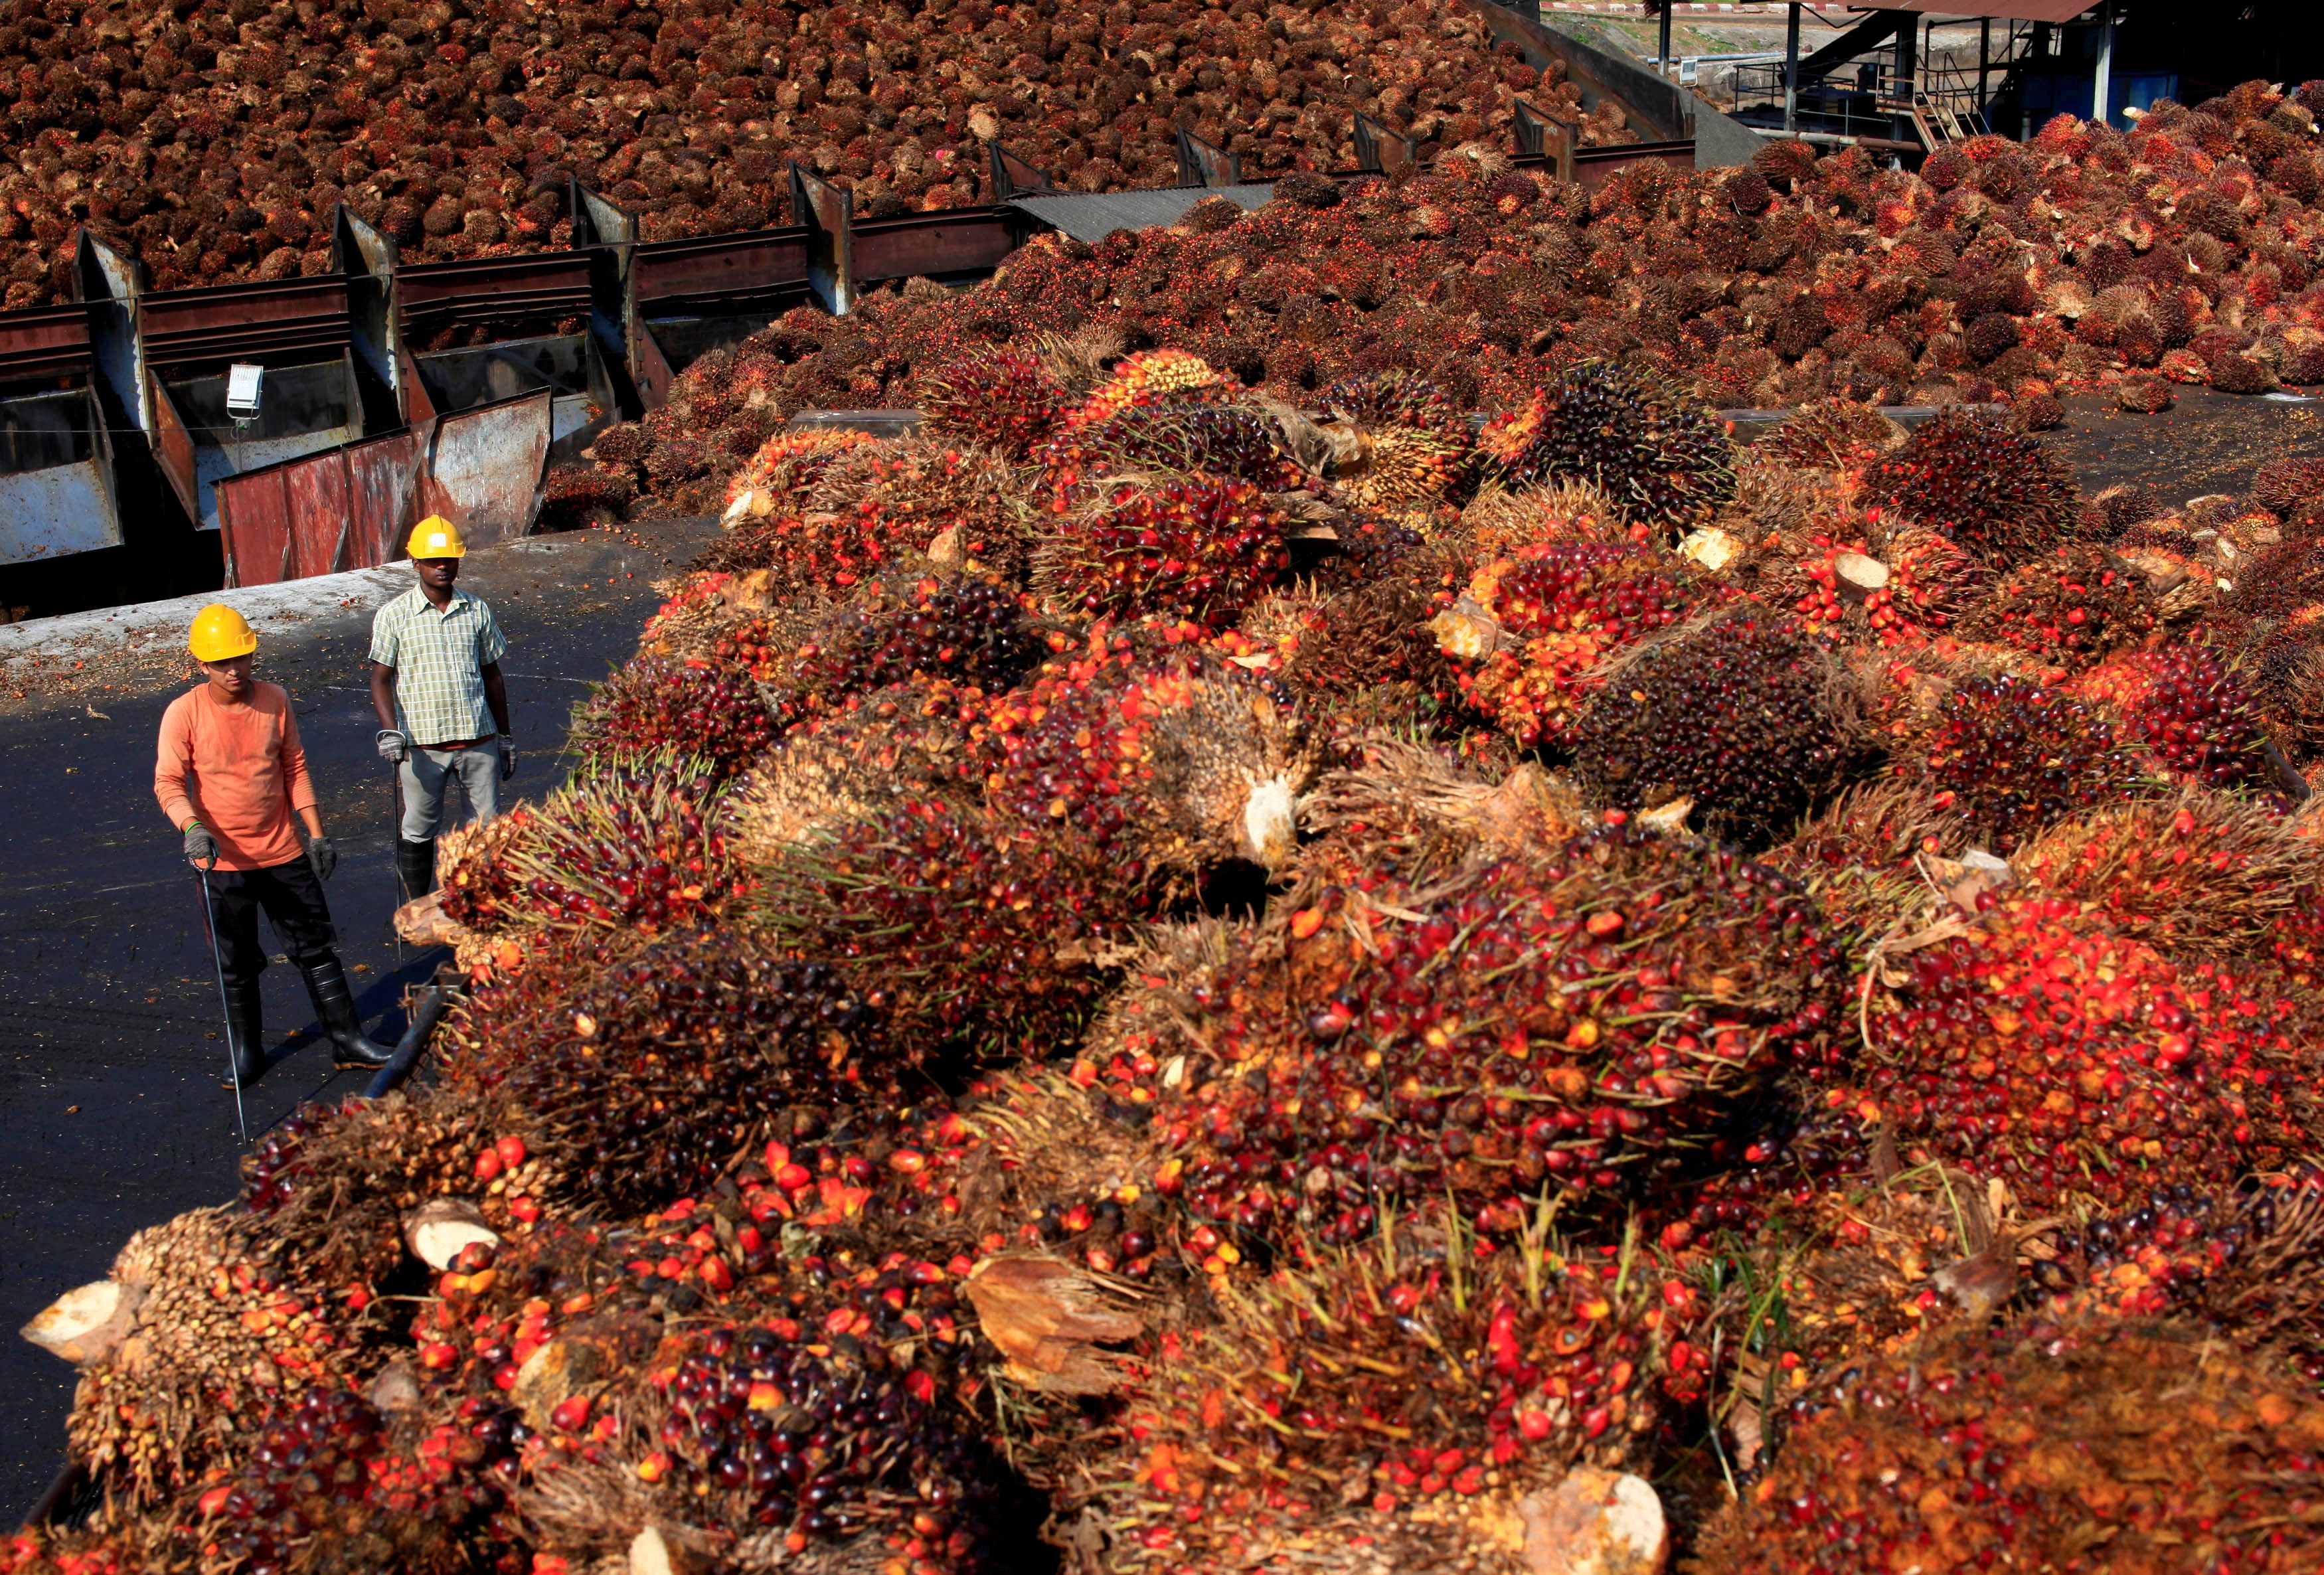 Workers stand near palm oil fruits inside a palm oil factory in Sepang, outside Kuala Lumpur